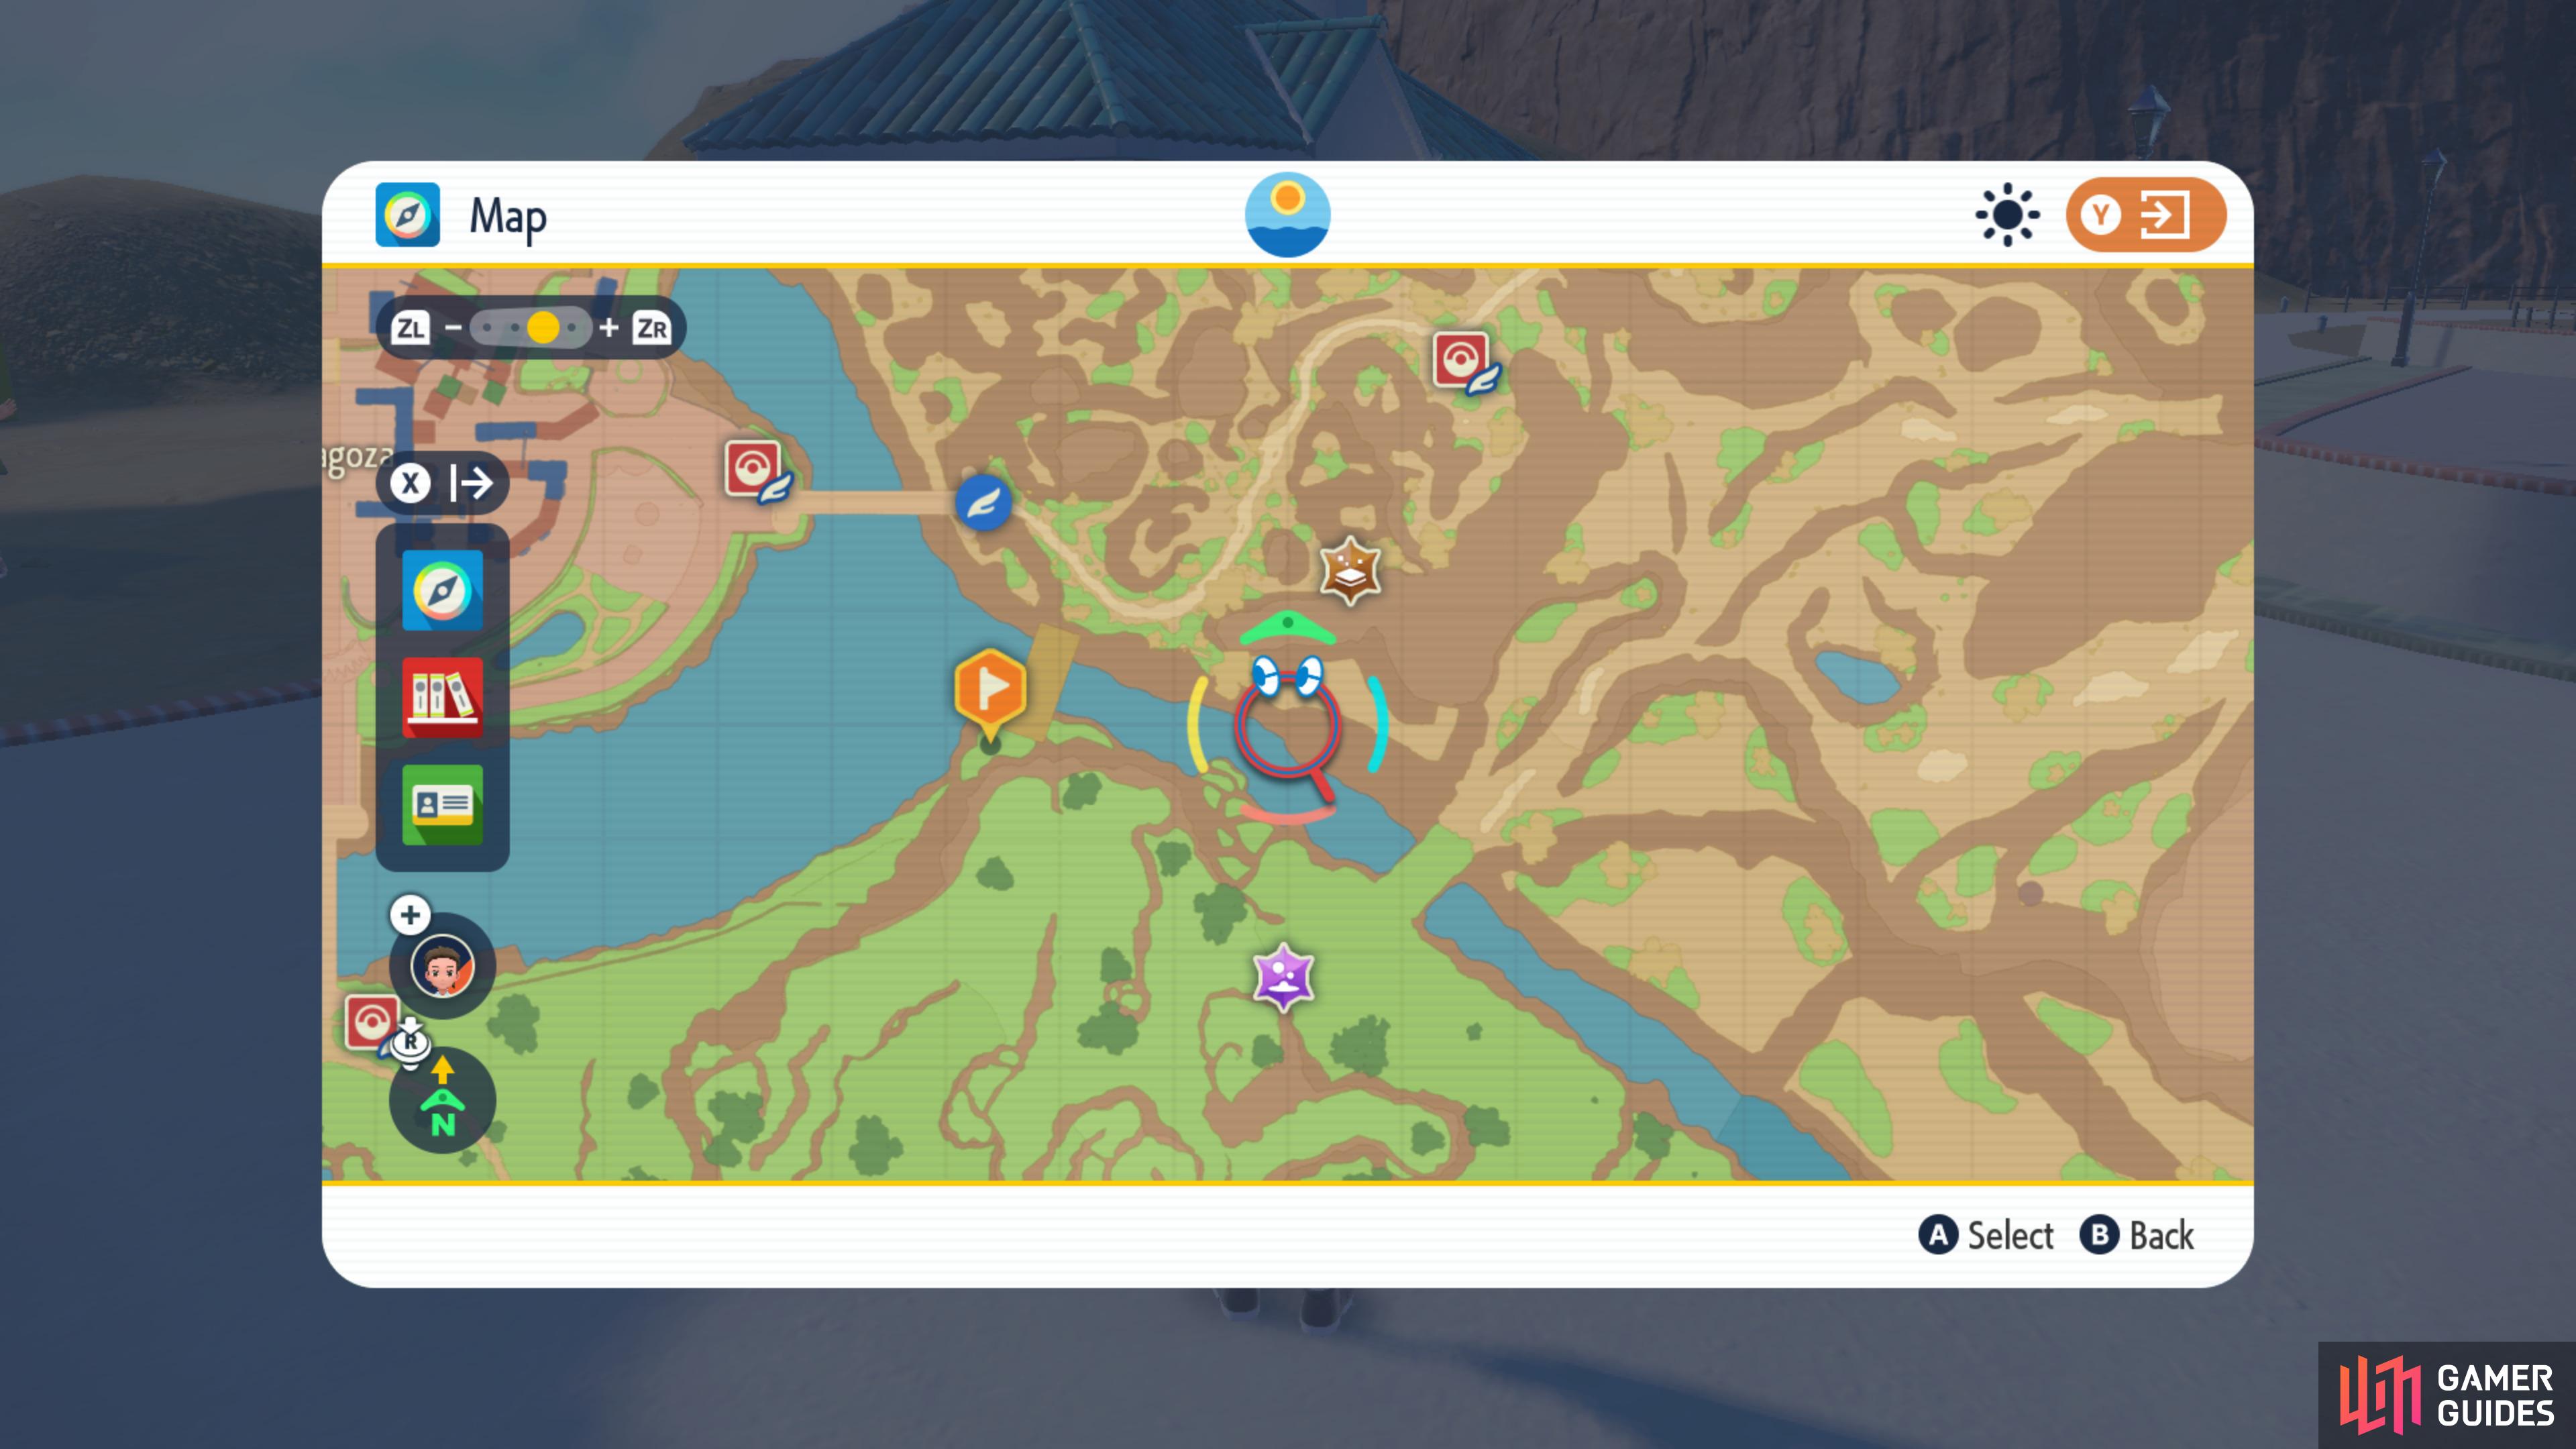 The next flag icon has you head towards the bridge leading to South Province Area Three